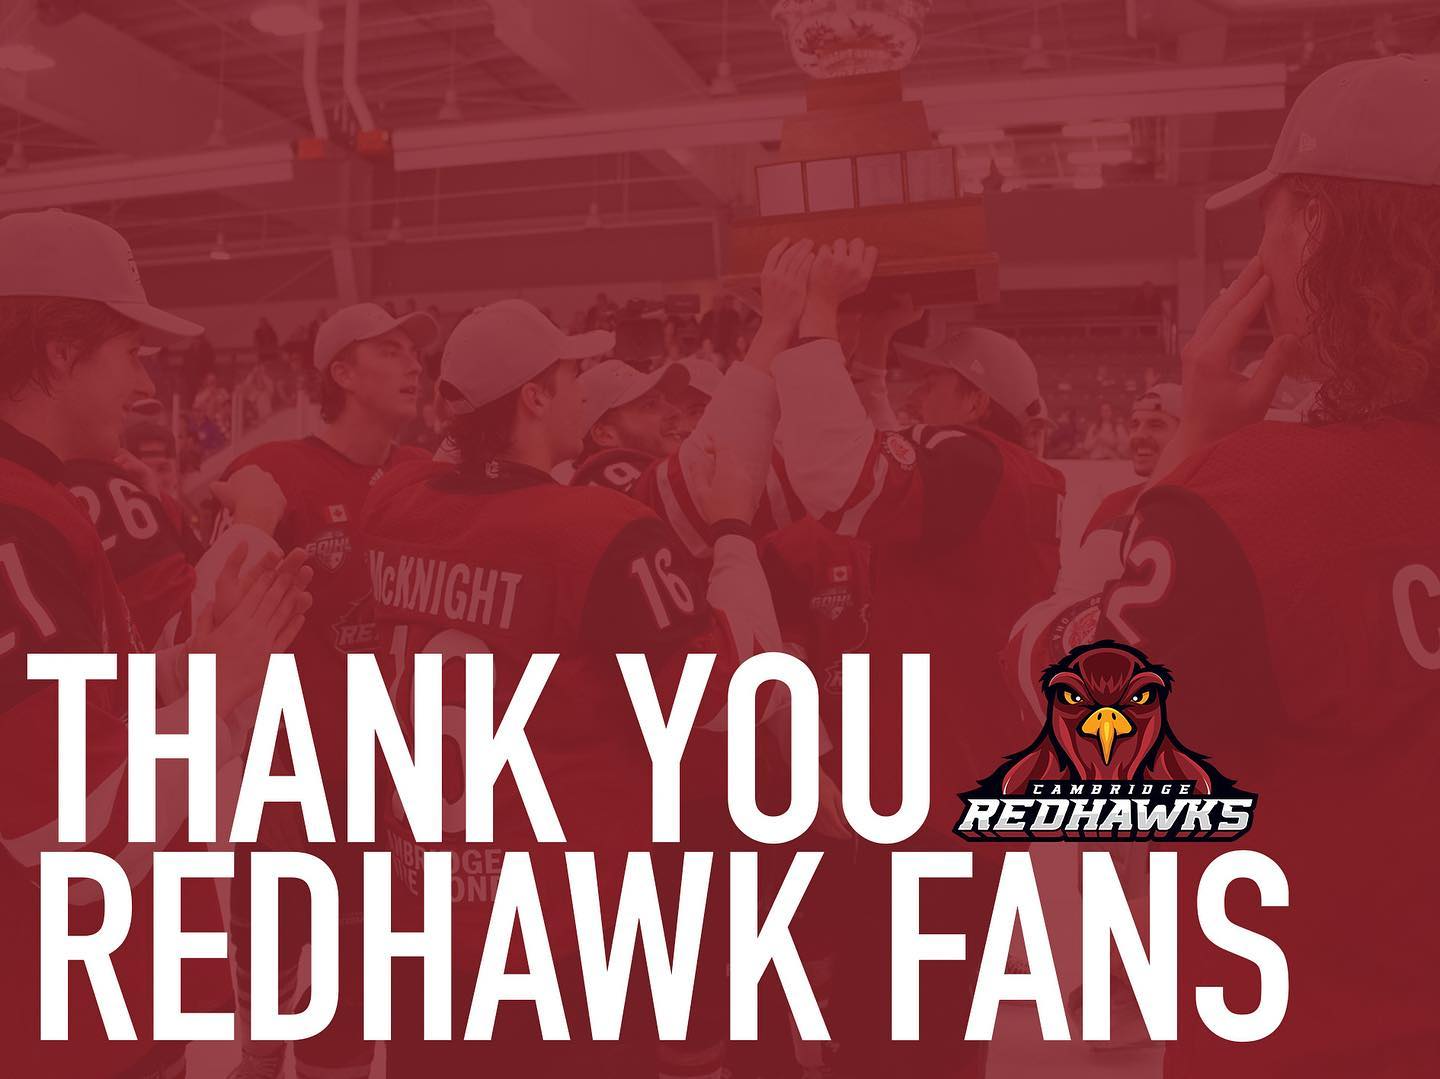 RedHawk fans, there are no words to describe how thankful we are to have each and every one of you every Saturday night cheering us on, no matter the score. 

We cannot wait to get back on the ice to play for you next season. Until then, enjoy your summer and we’ll see you in September! 🏒